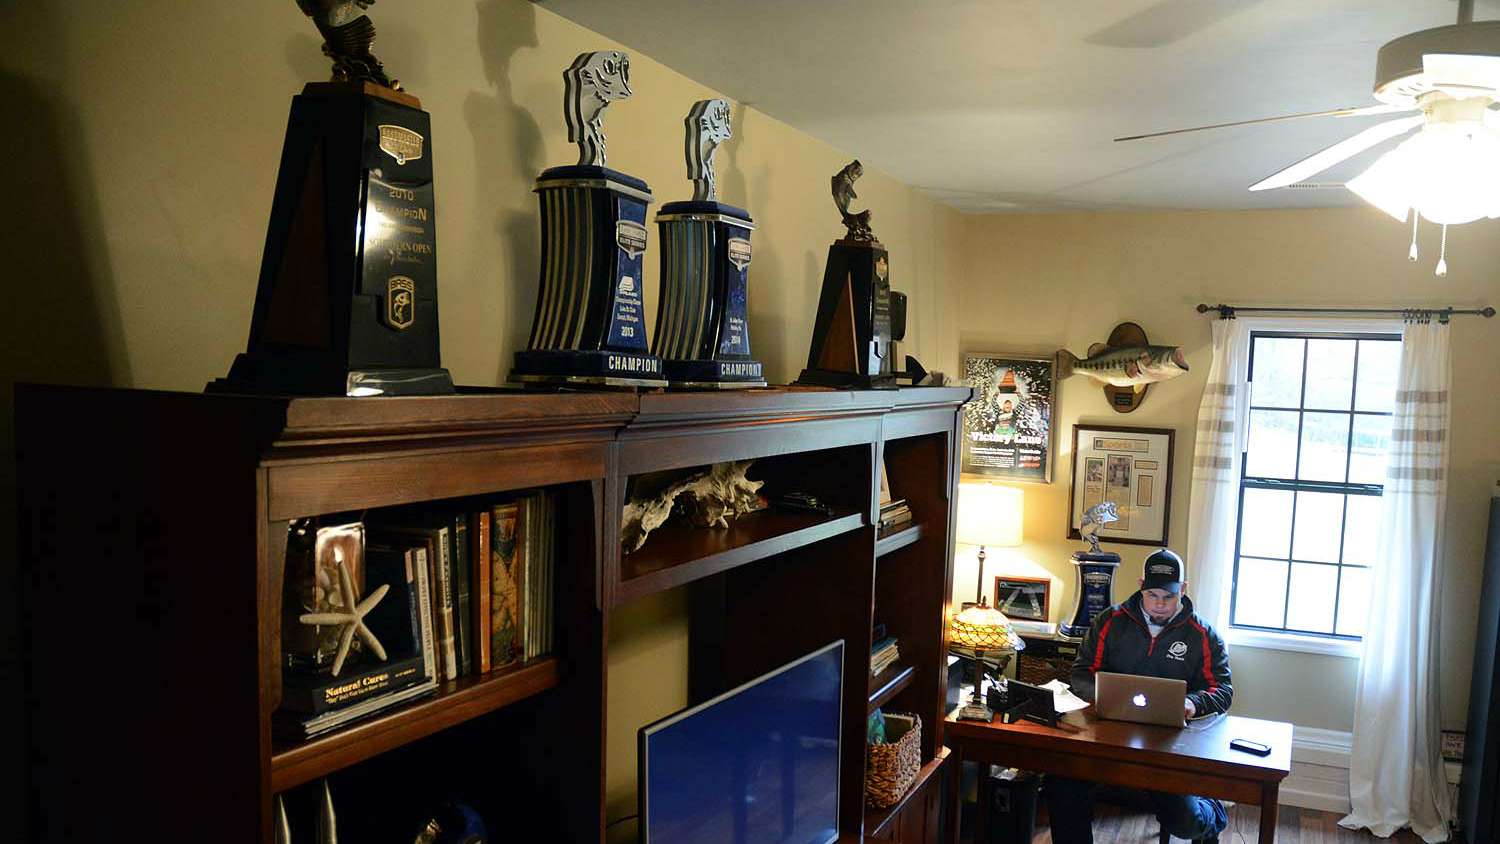 The business side of the sport happens in this home office. Behind Lane is the winnerâs trophy from the 2015 Elite Series on the Sabine River. Flanking the top shelf are trophies from Bassmaster Open wins at Lake Okeechobee (2010) and The Harris Chain (2012). In between are trophies from Elite Series wins at Lake St. Clair (2013) and the St. Johns River (2014). 